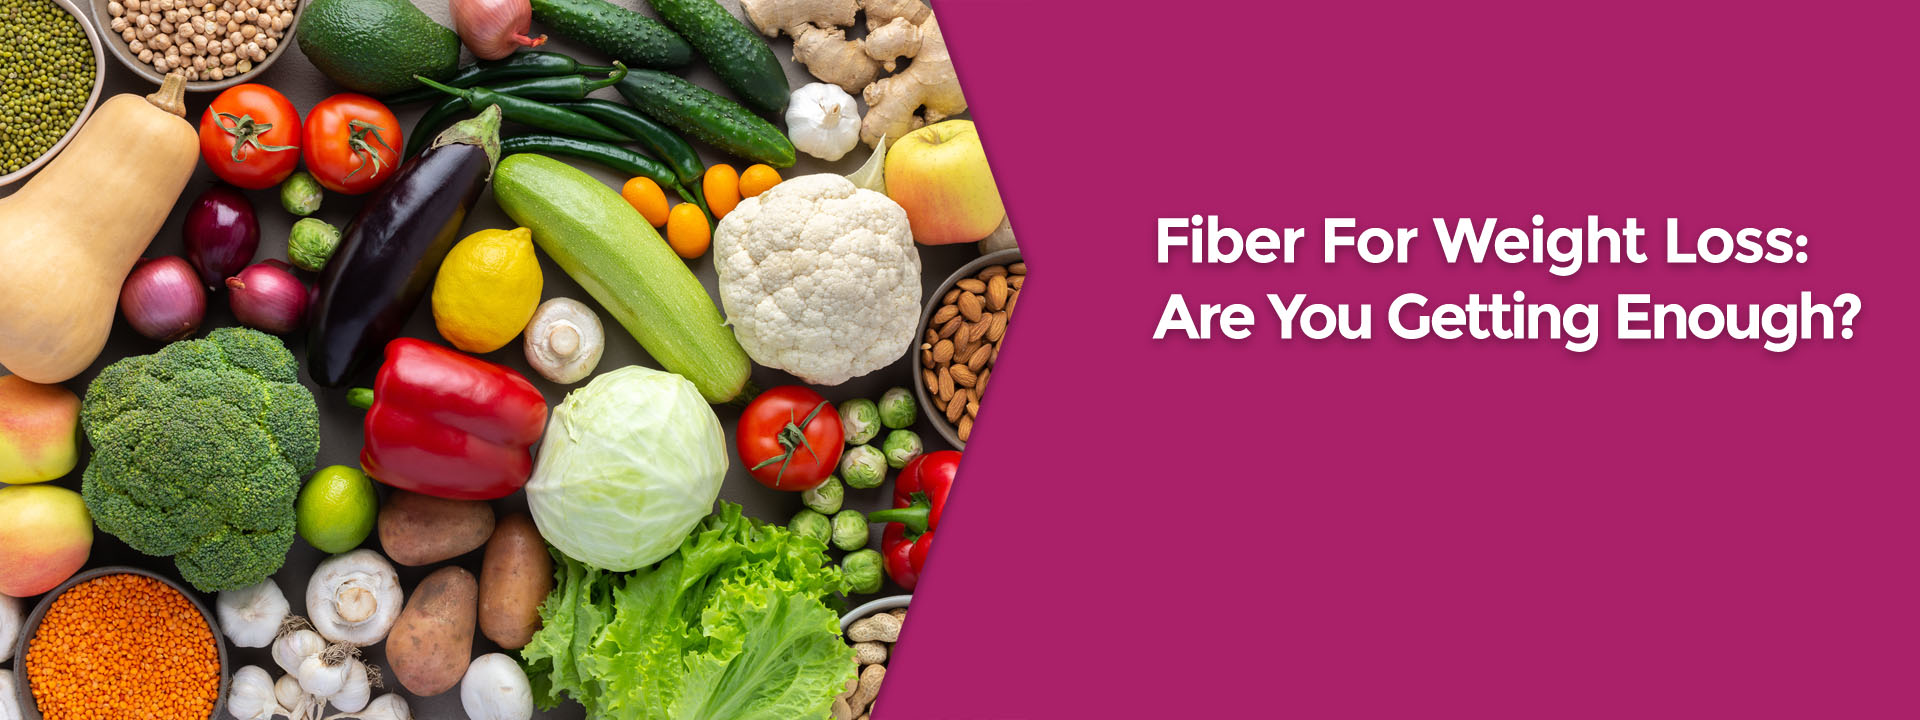 Fiber For Weight Loss - Are You Getting Enough?